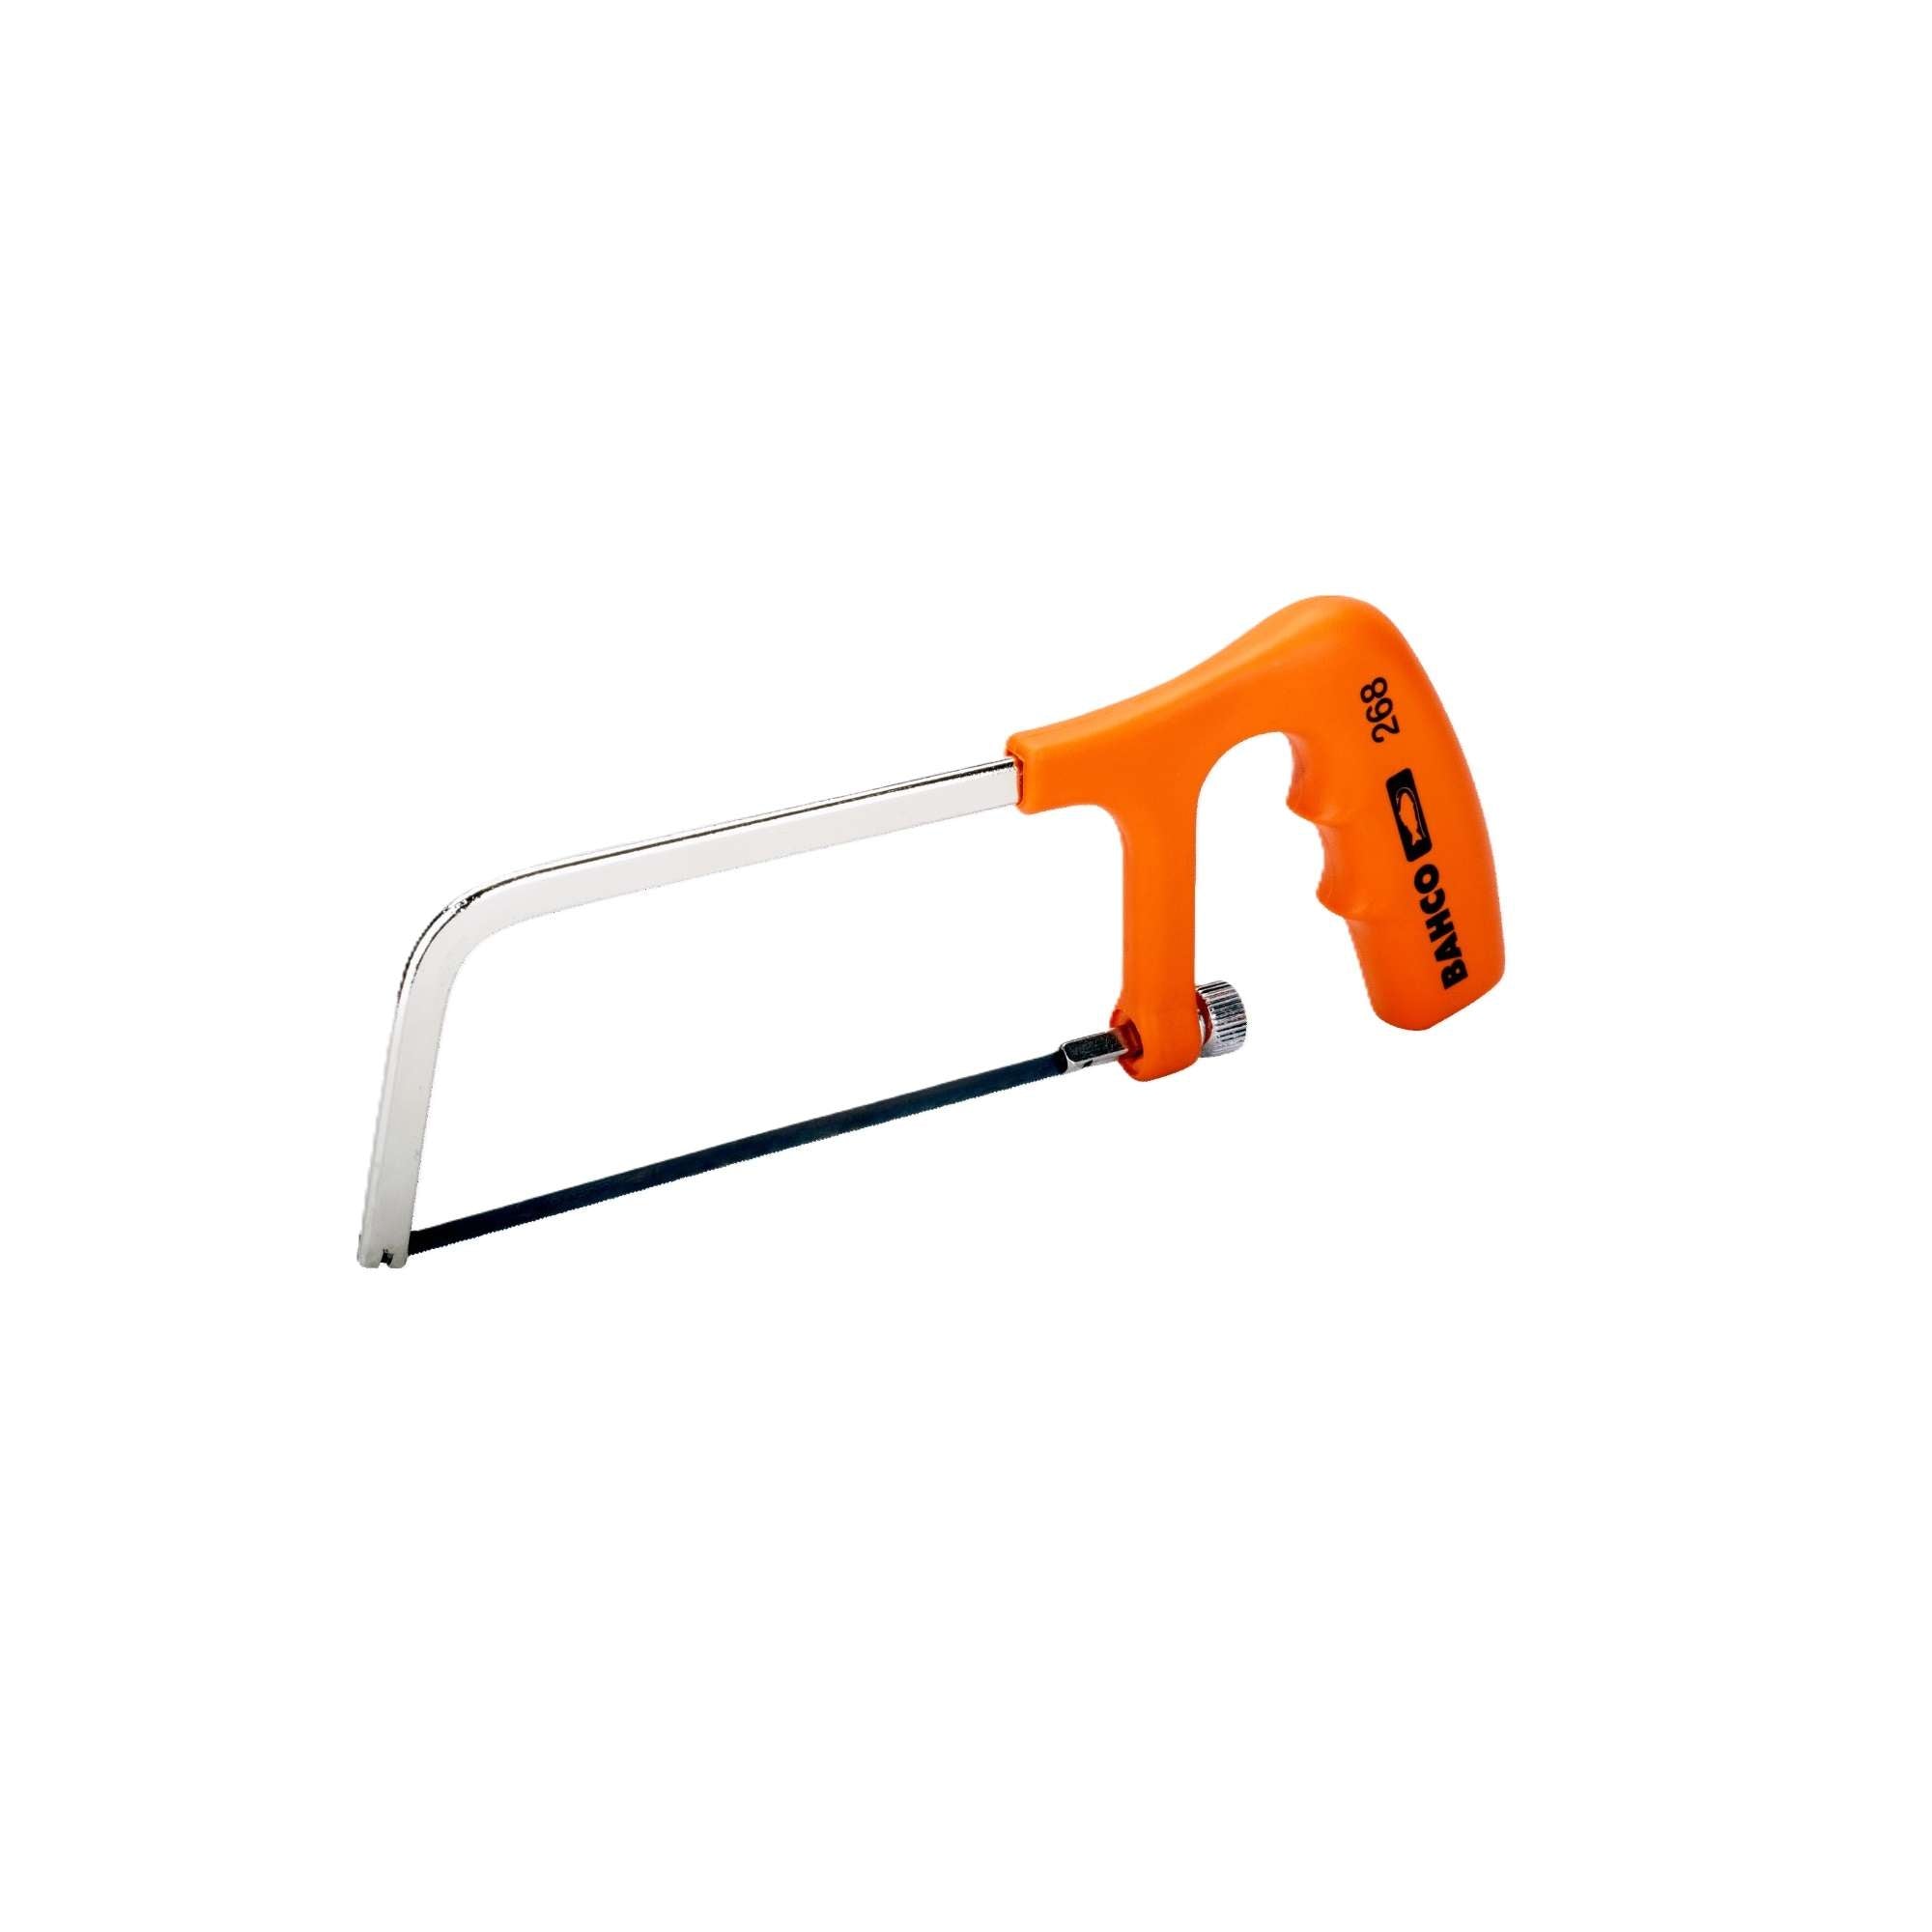 Mini-saw with steel frame and 150mm fiberglass handle Bahco 268